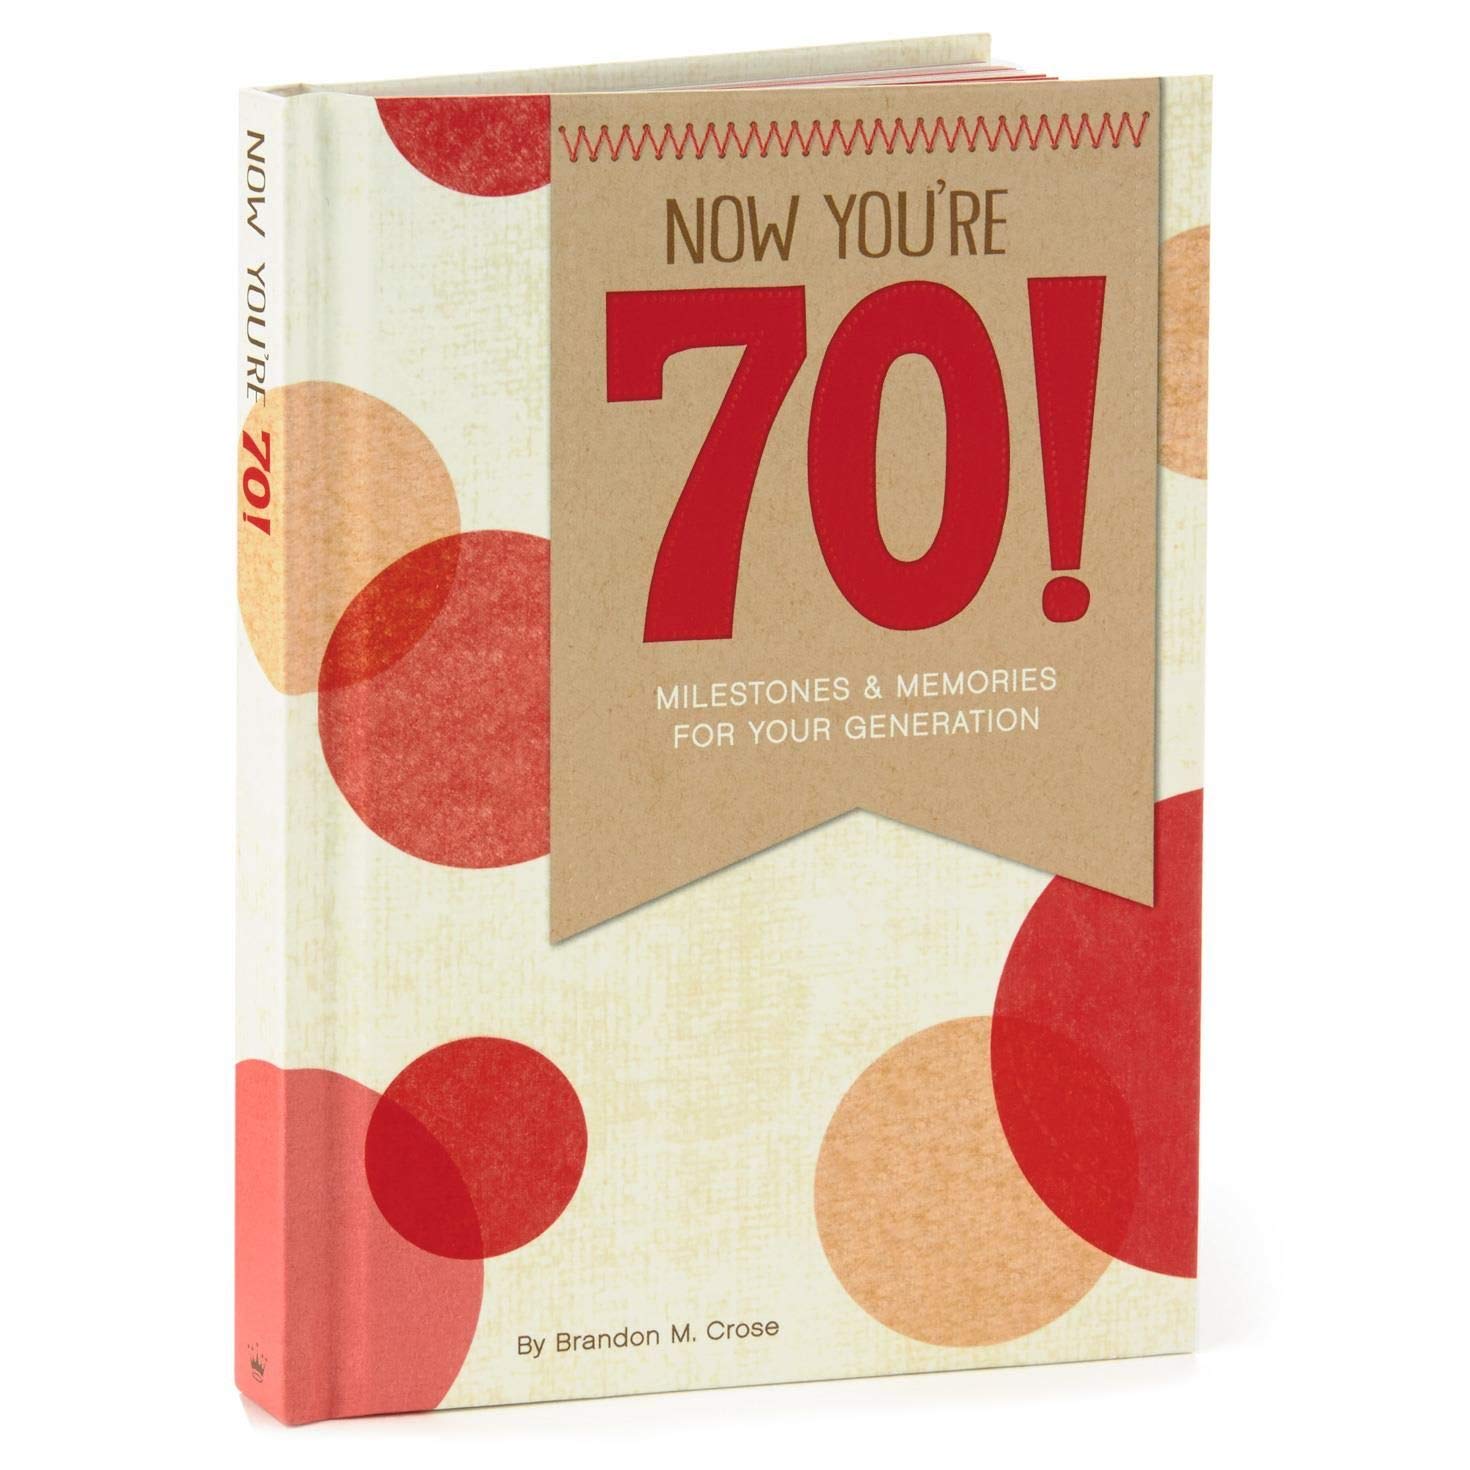 Hallmark Now You're 70! Milestones and Memories for Your Generation